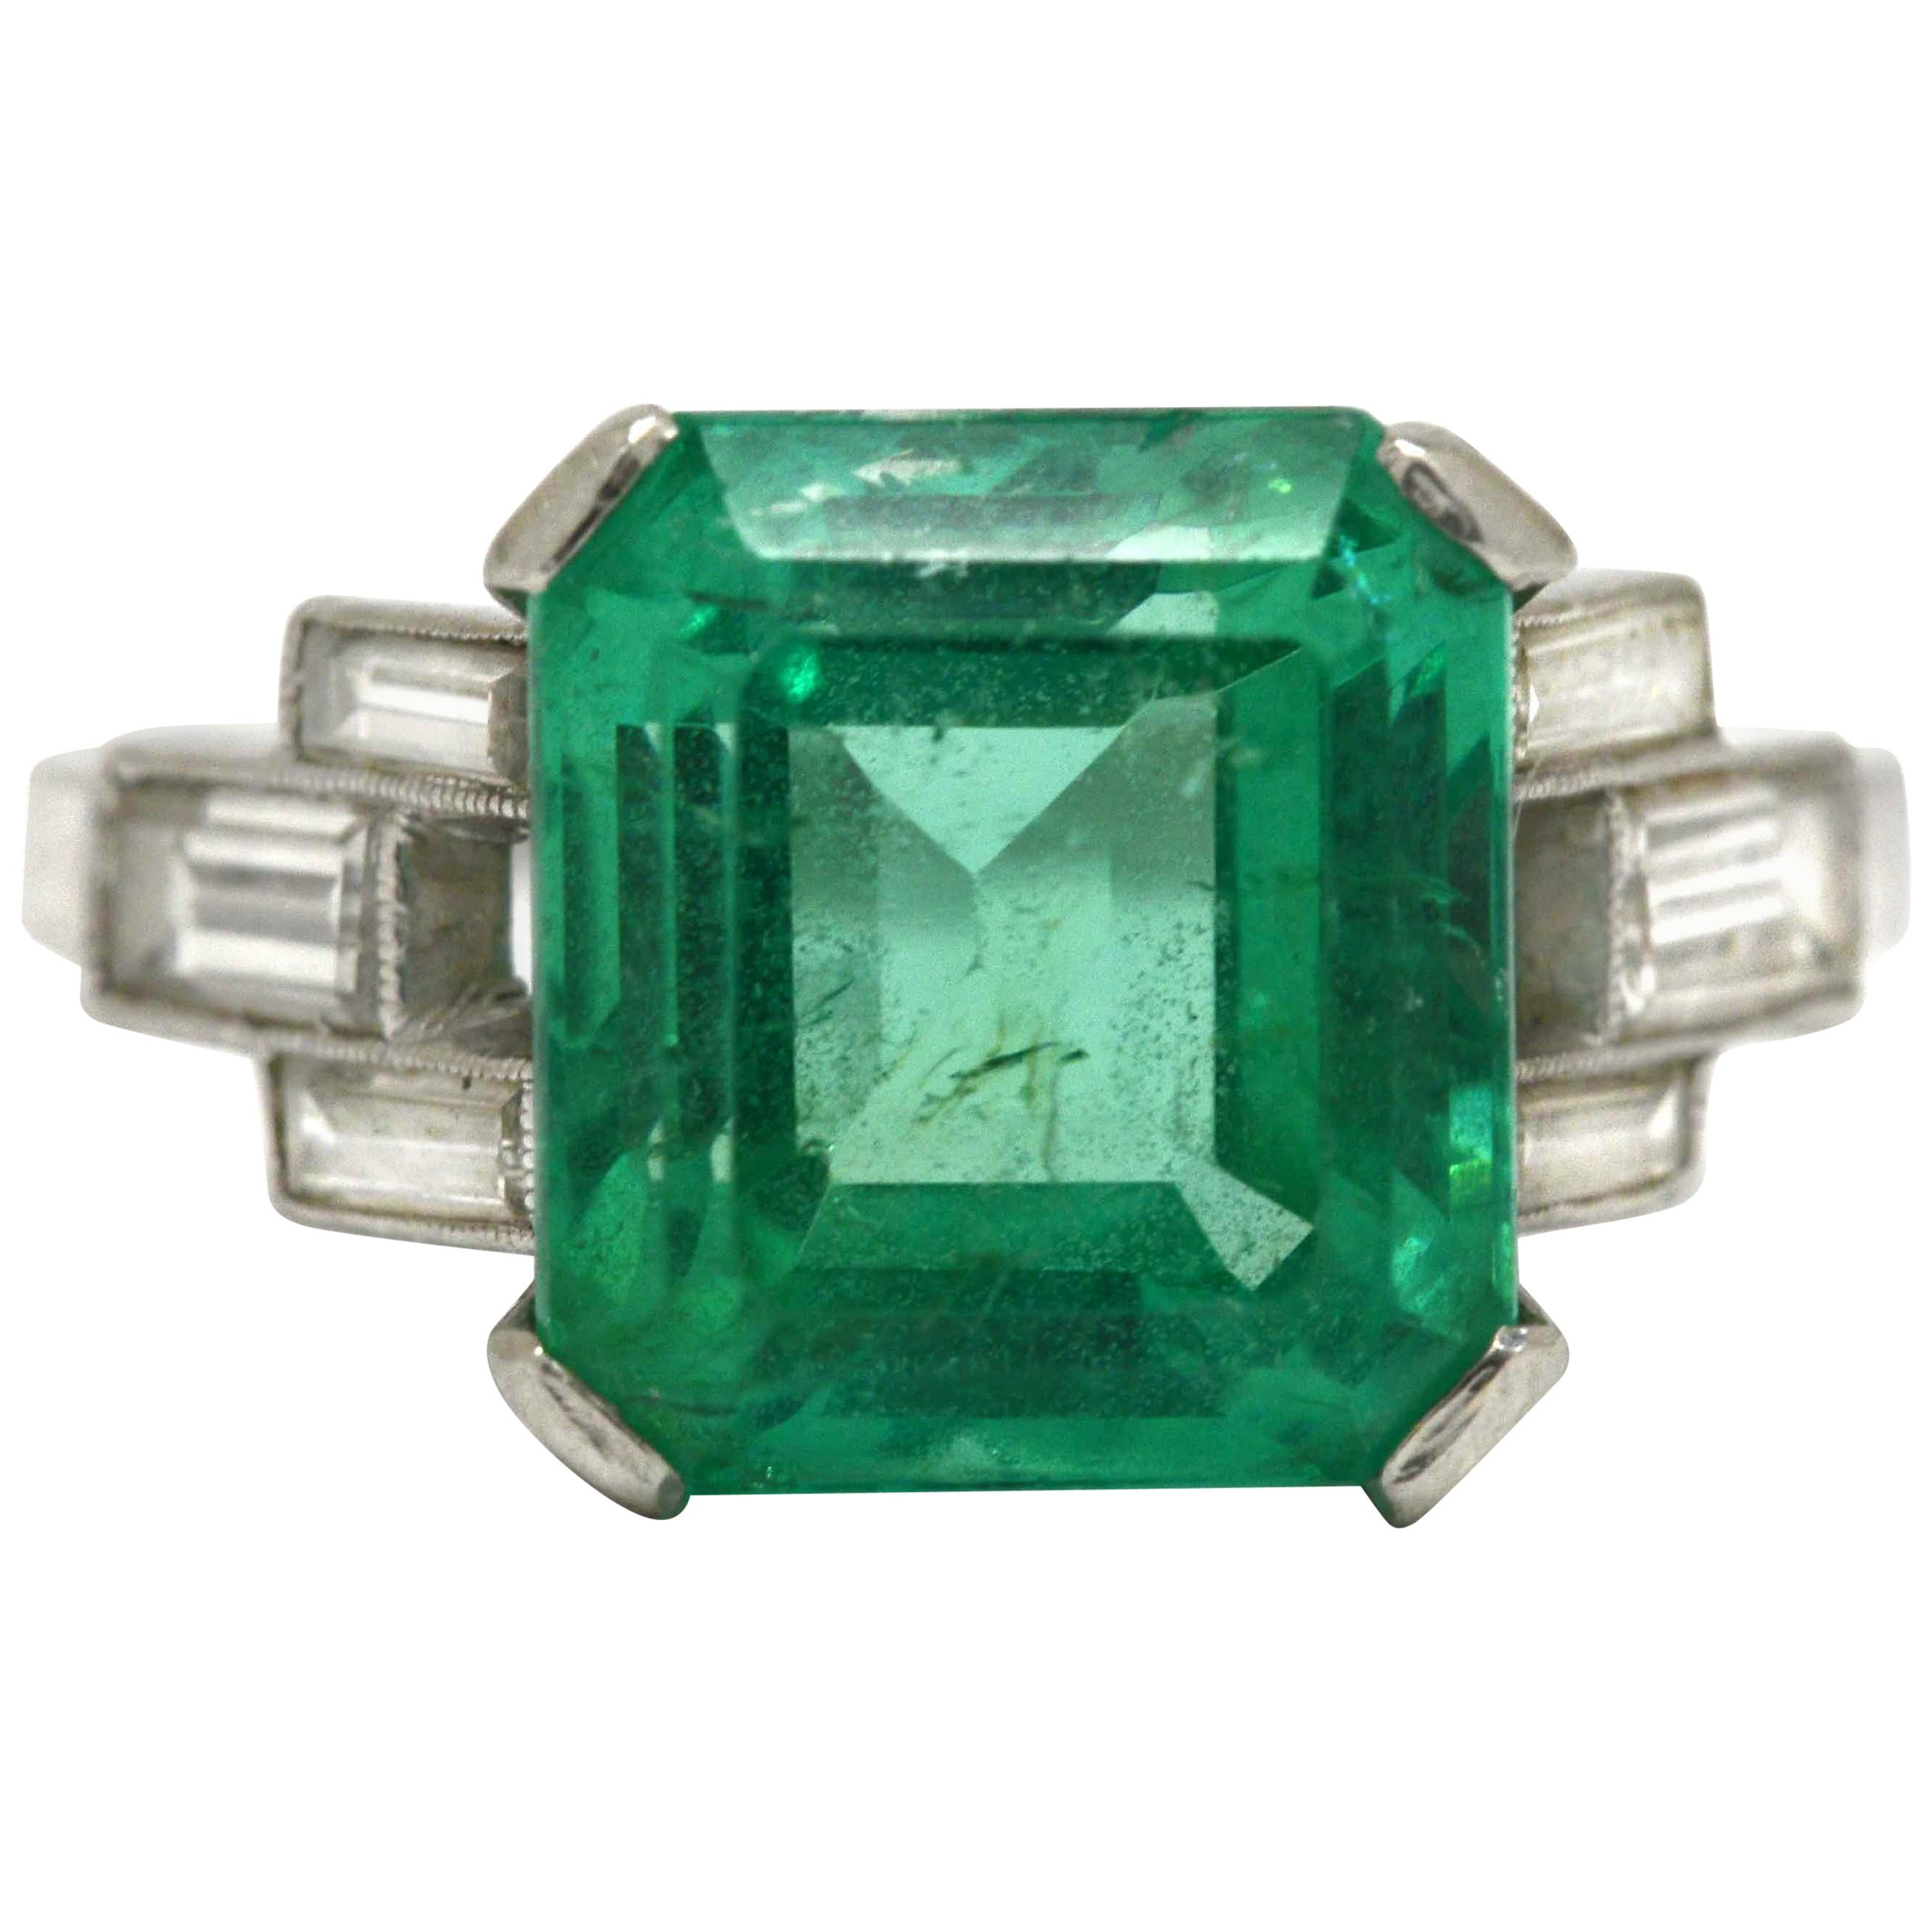 Art Deco Certified 5.47 Carat Colombian Emerald Cocktail Ring Engagement Wedding